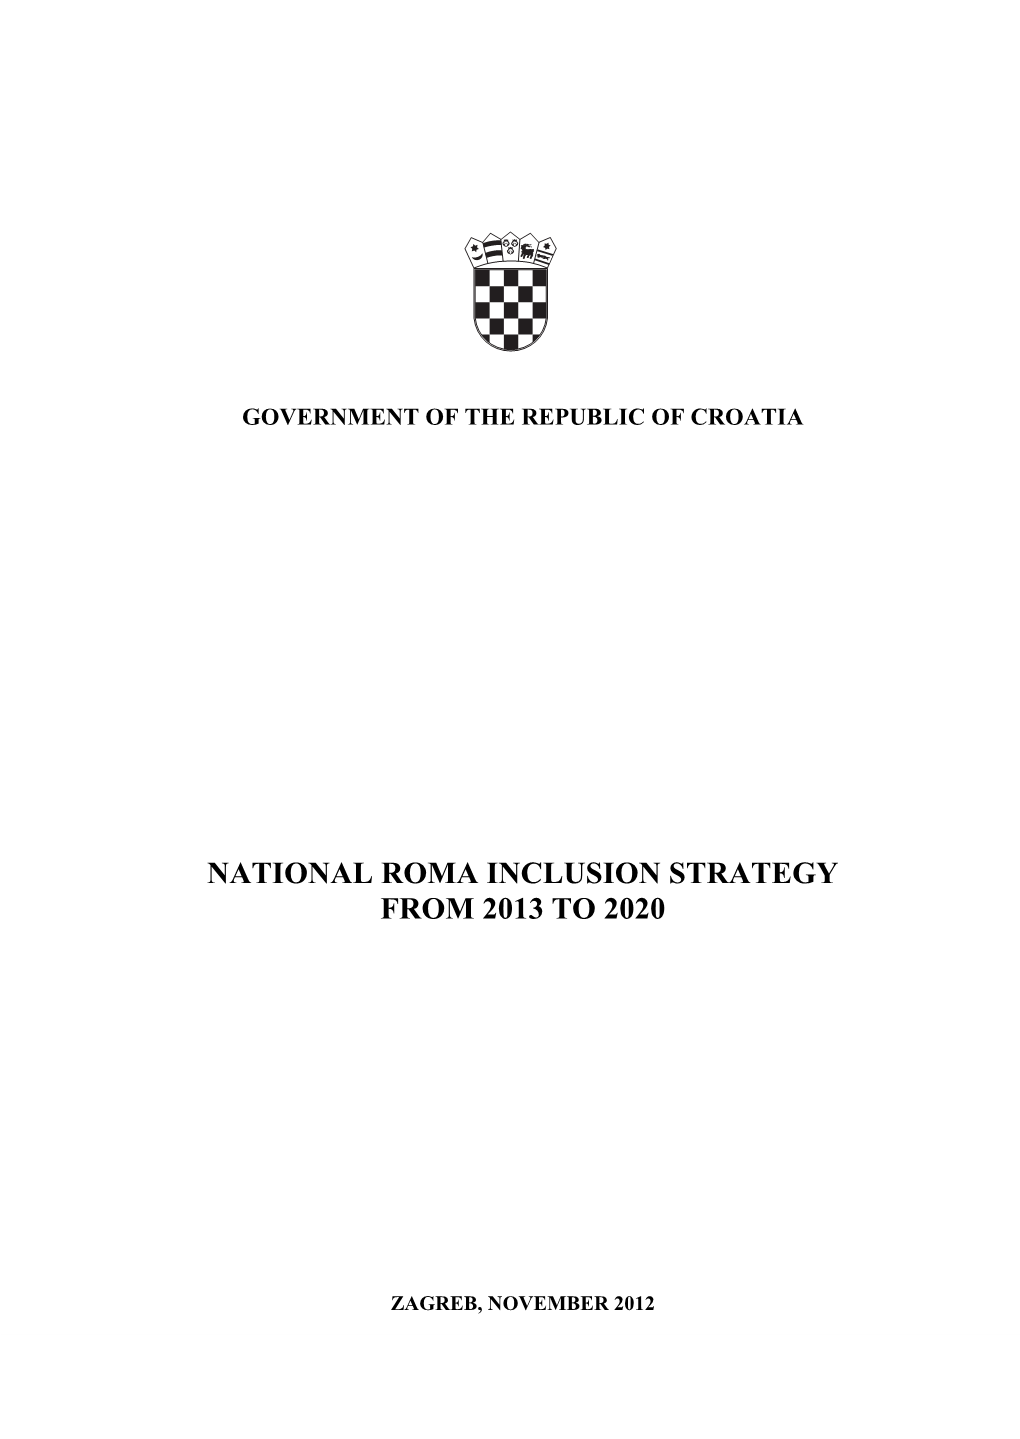 National Roma Inclusion Strategy from 2013 to 2020